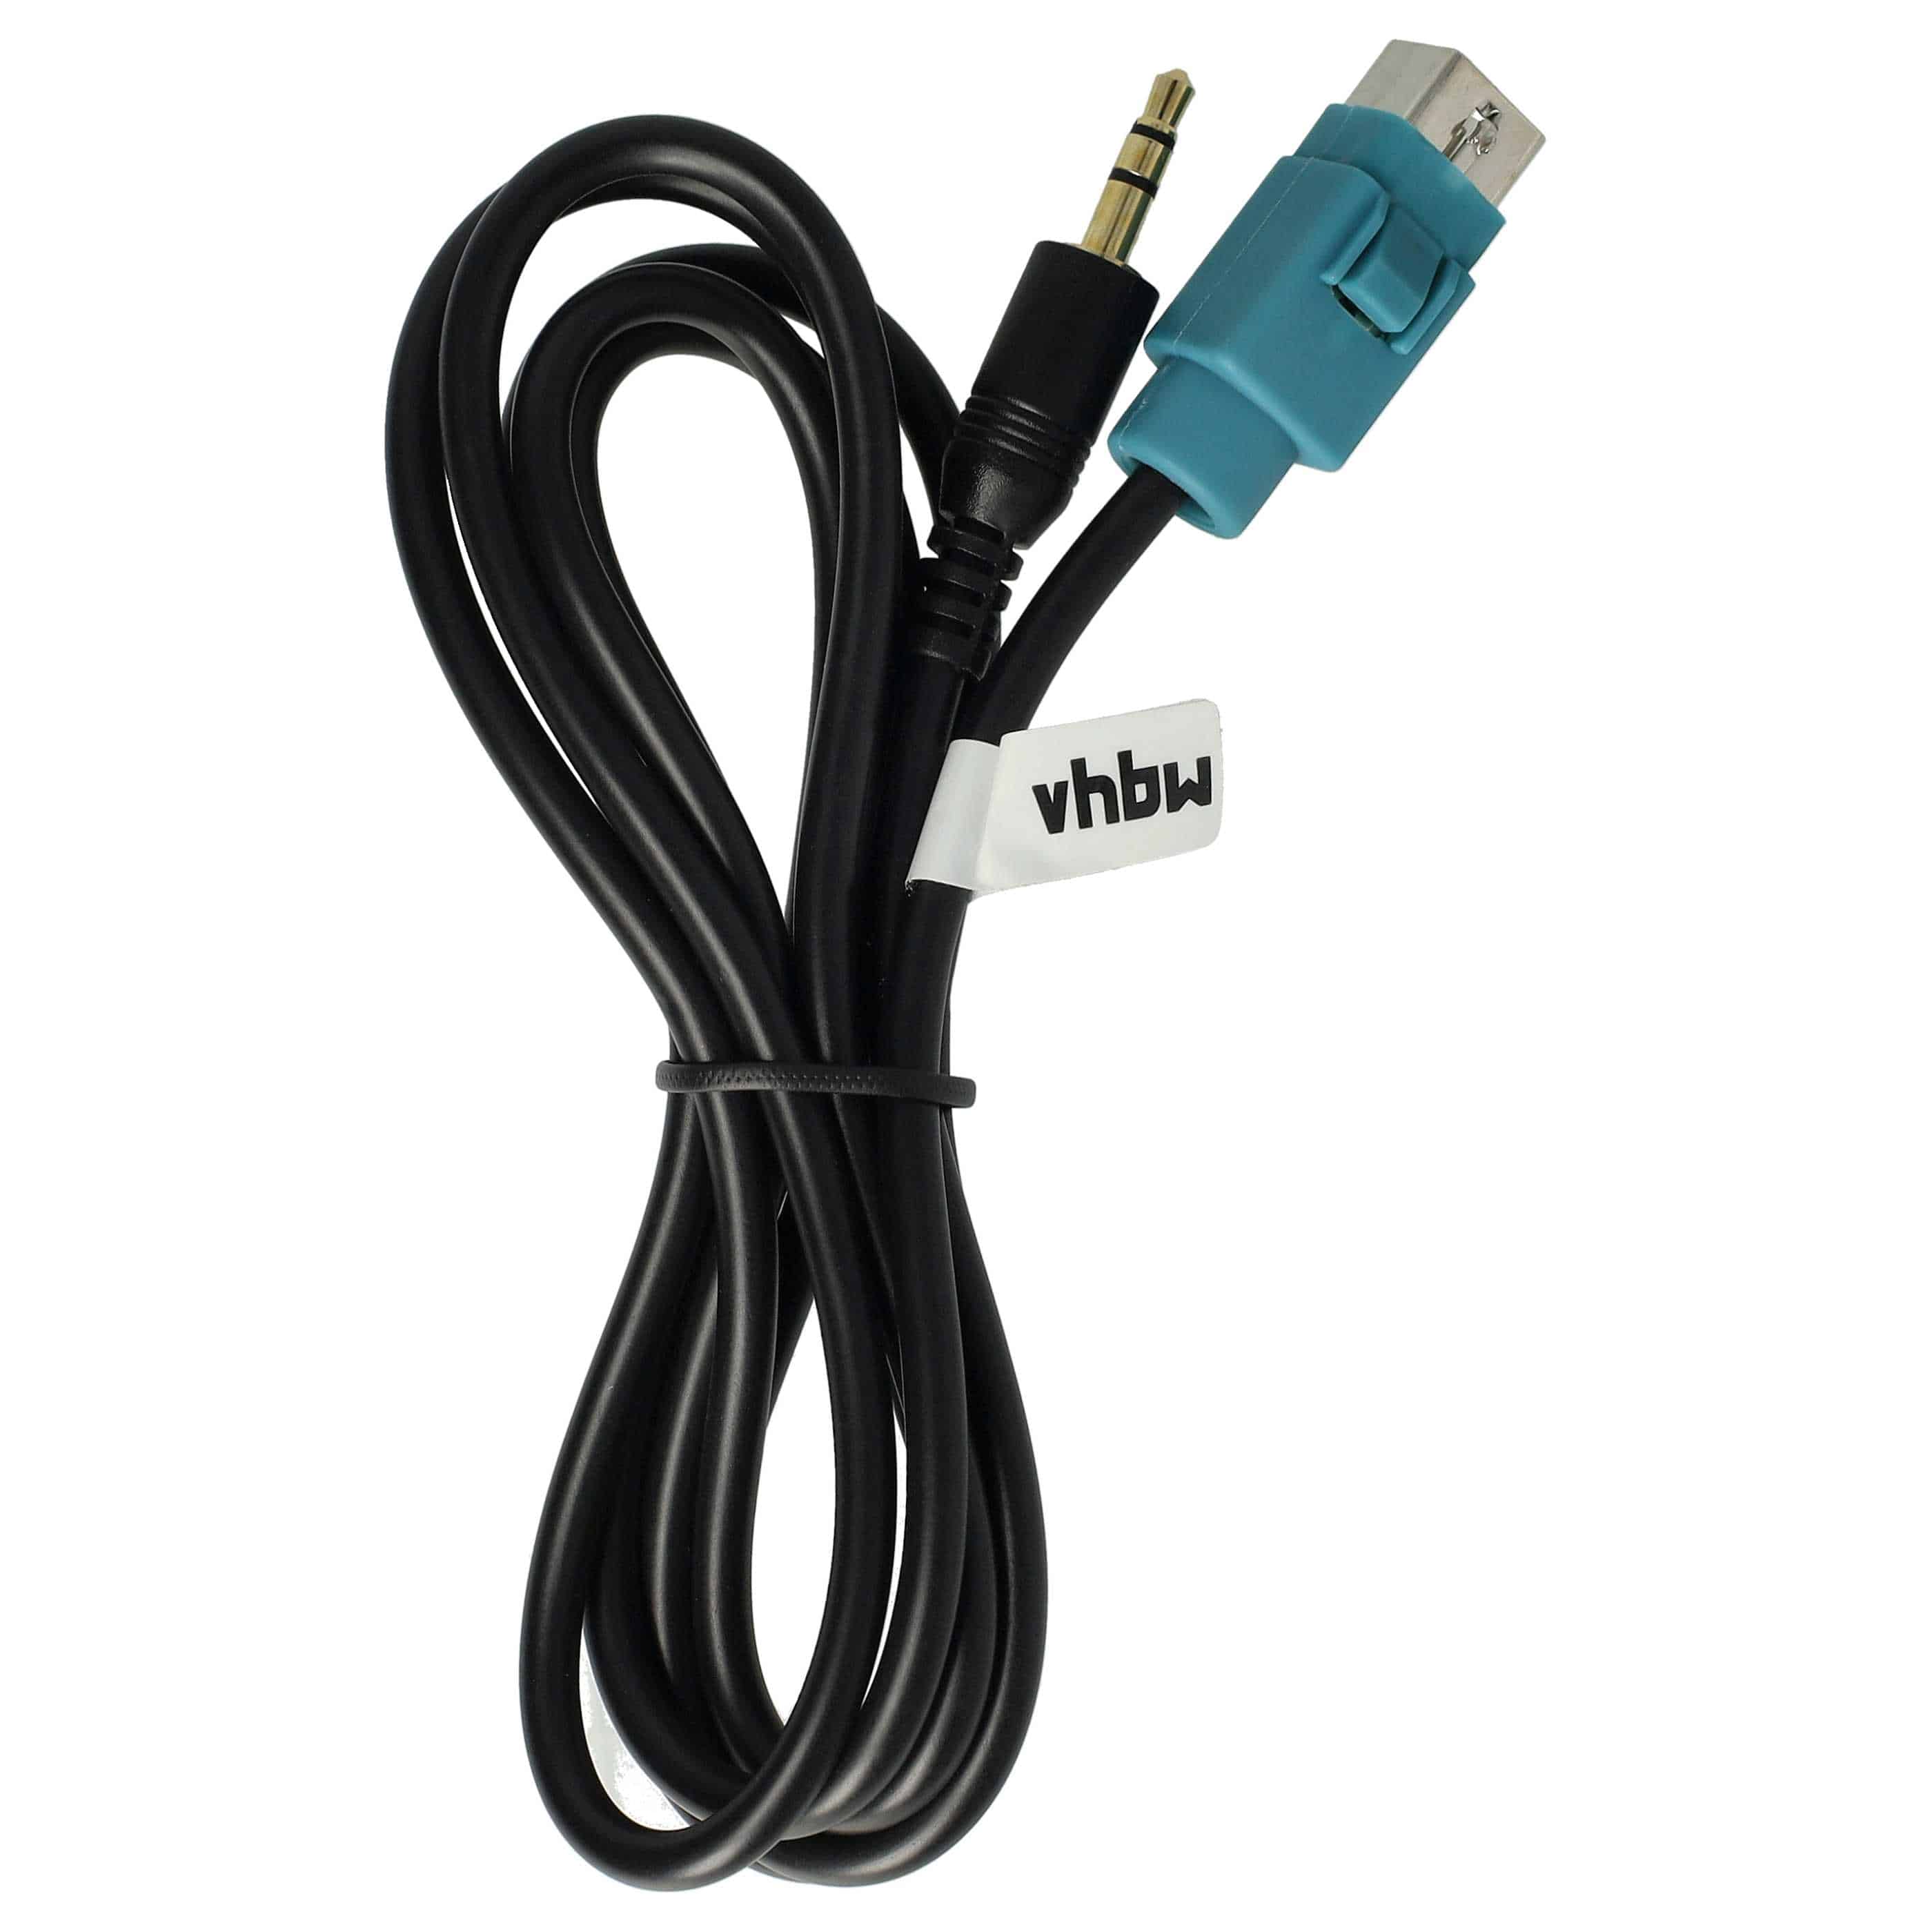 AUX Audio Adapter Cable as Replacement for Alpine KCE-237B Car Radio etc. - 100 cm, USB